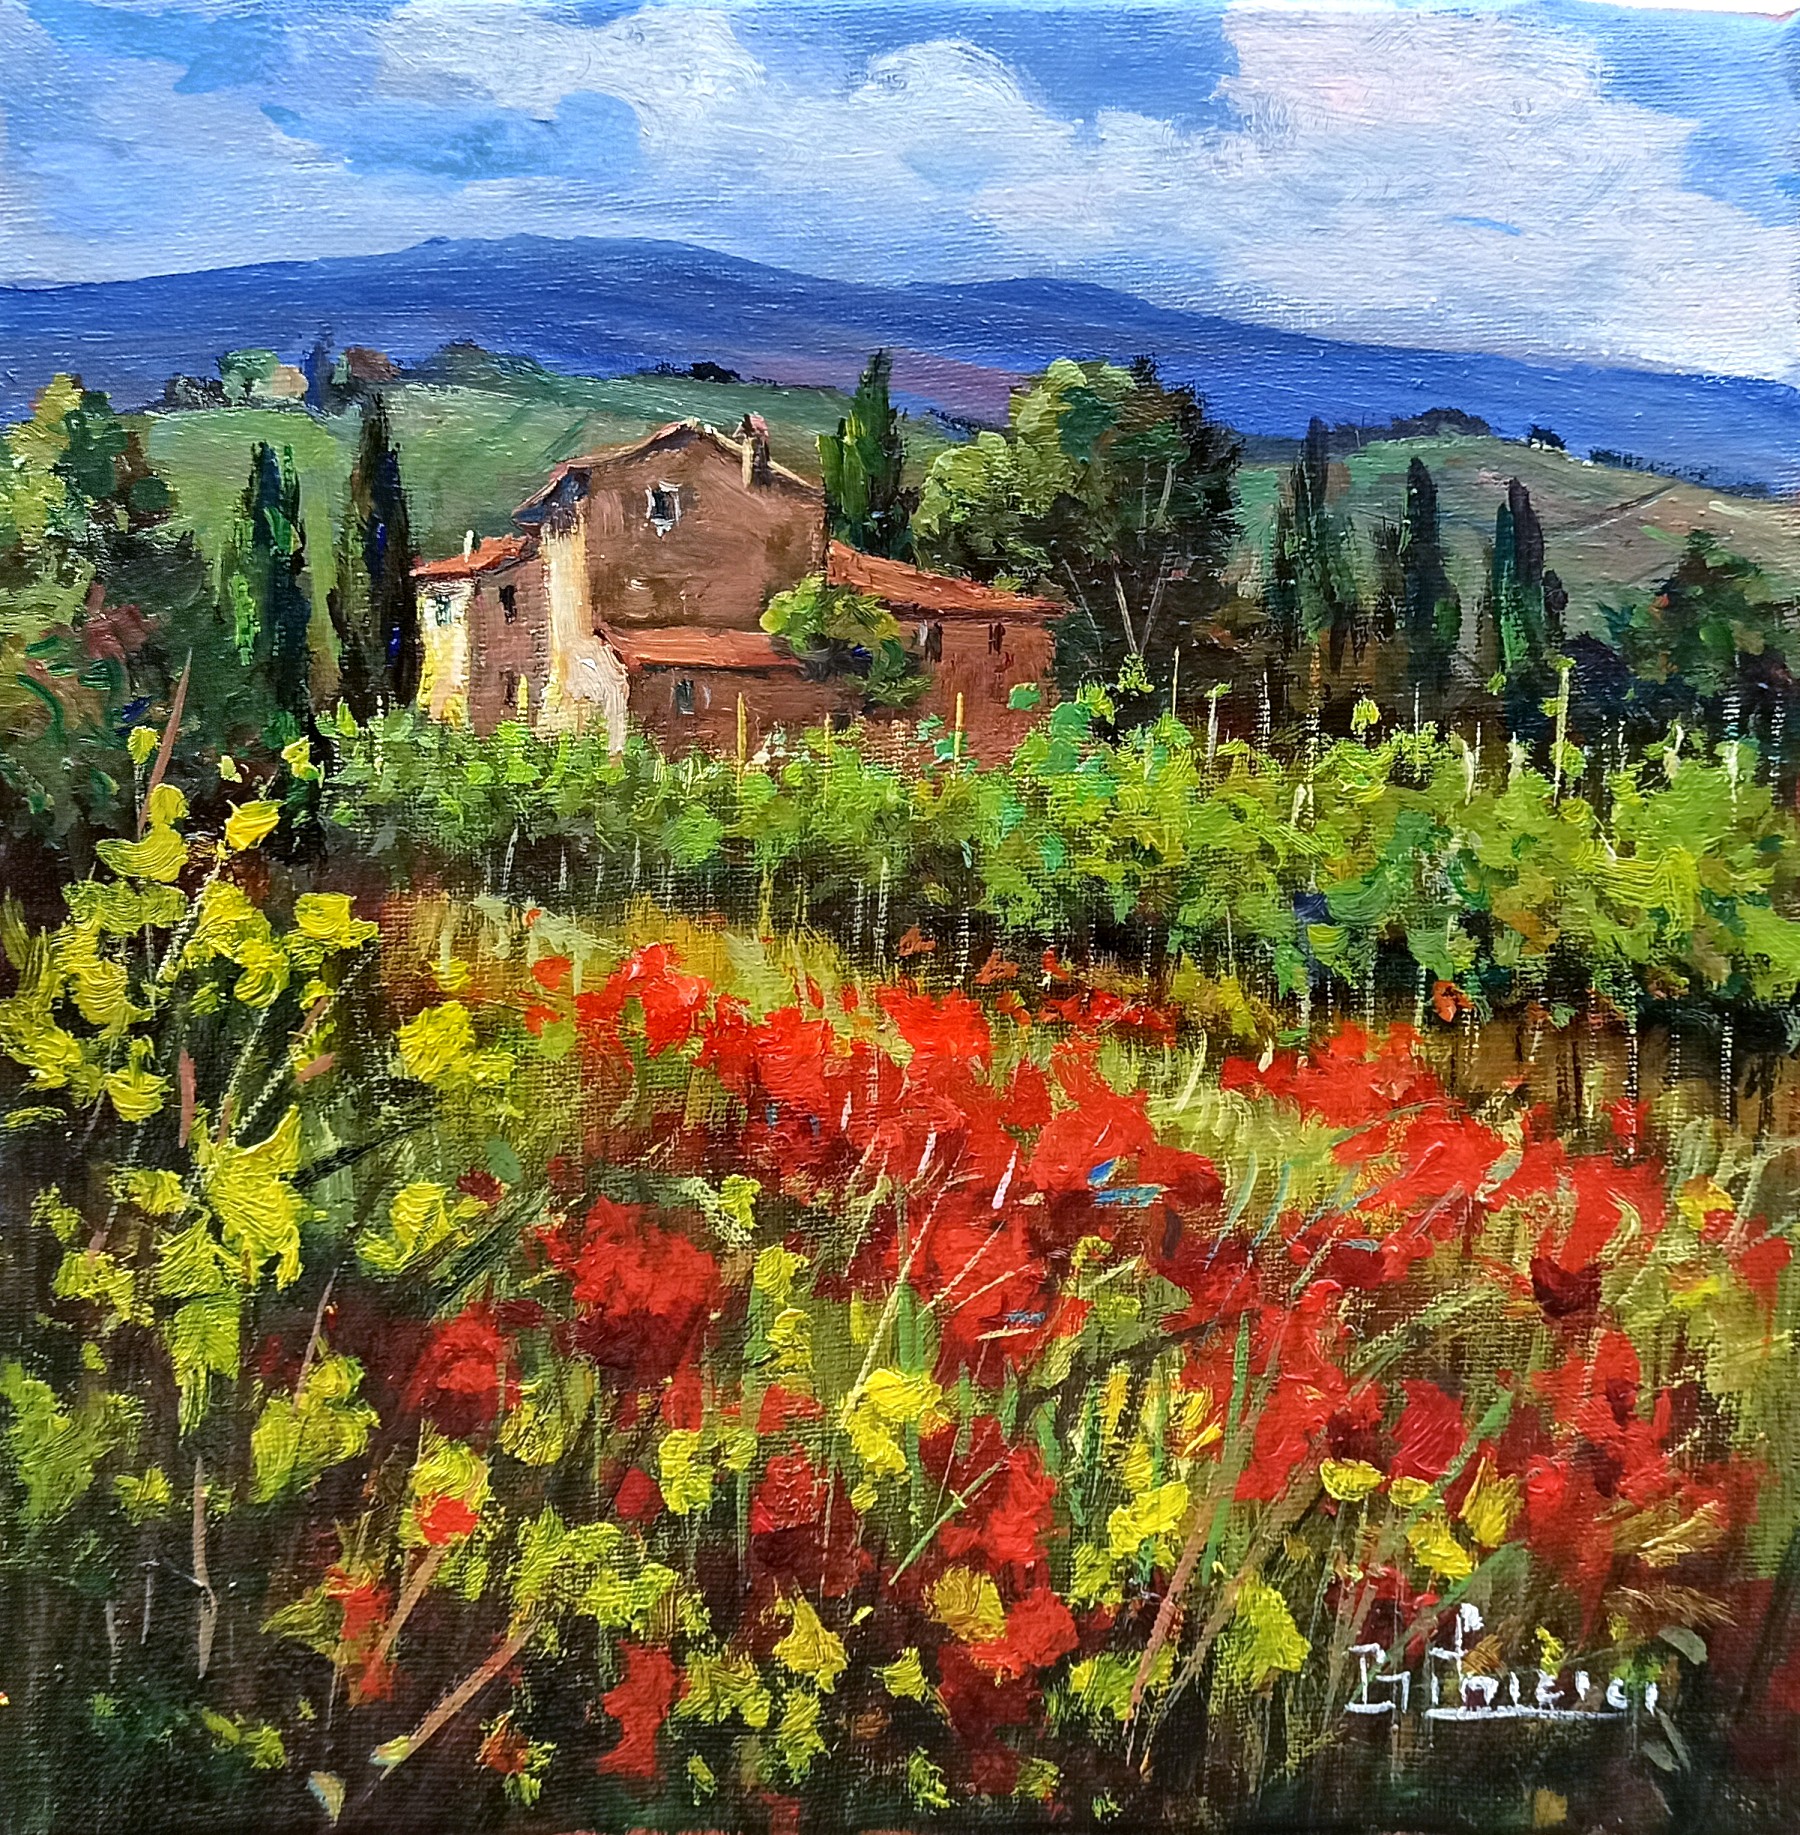 A gouche painting of a tuscany farmhouse in the evening on Craiyon